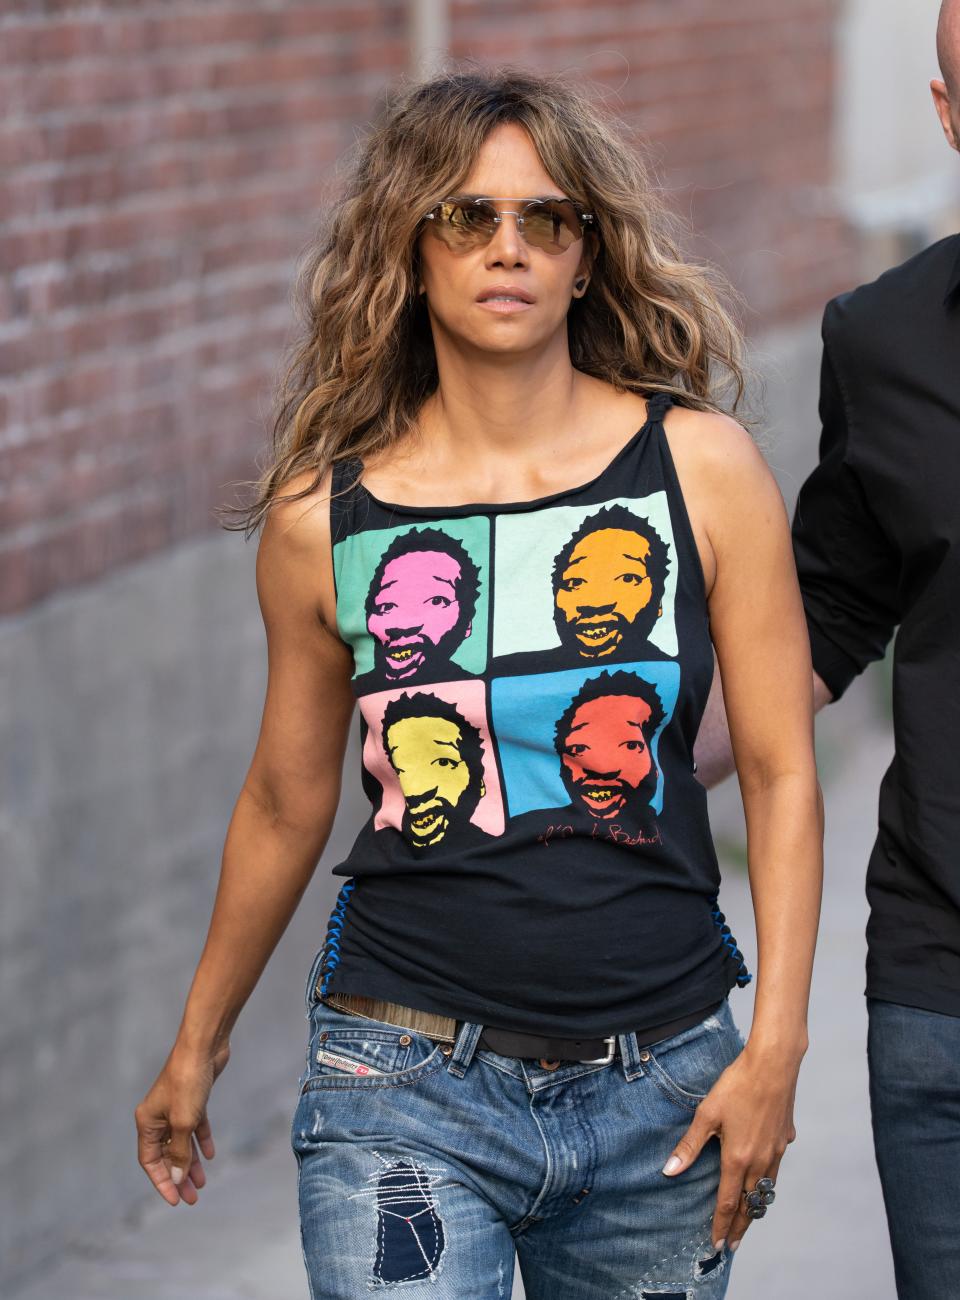 Halle Berry in the street